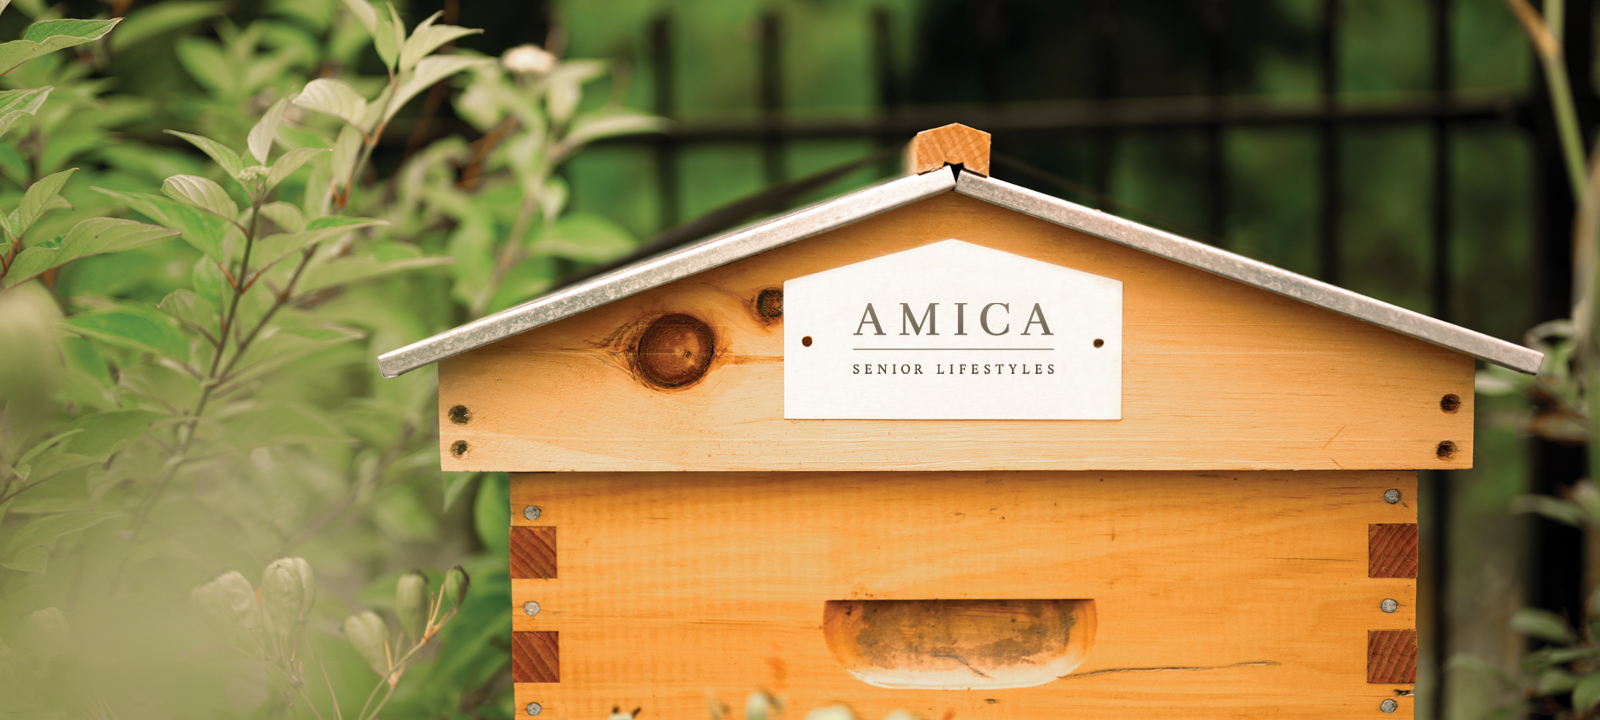 An Amica-branded honey hive in the garden at Amica Georgetown